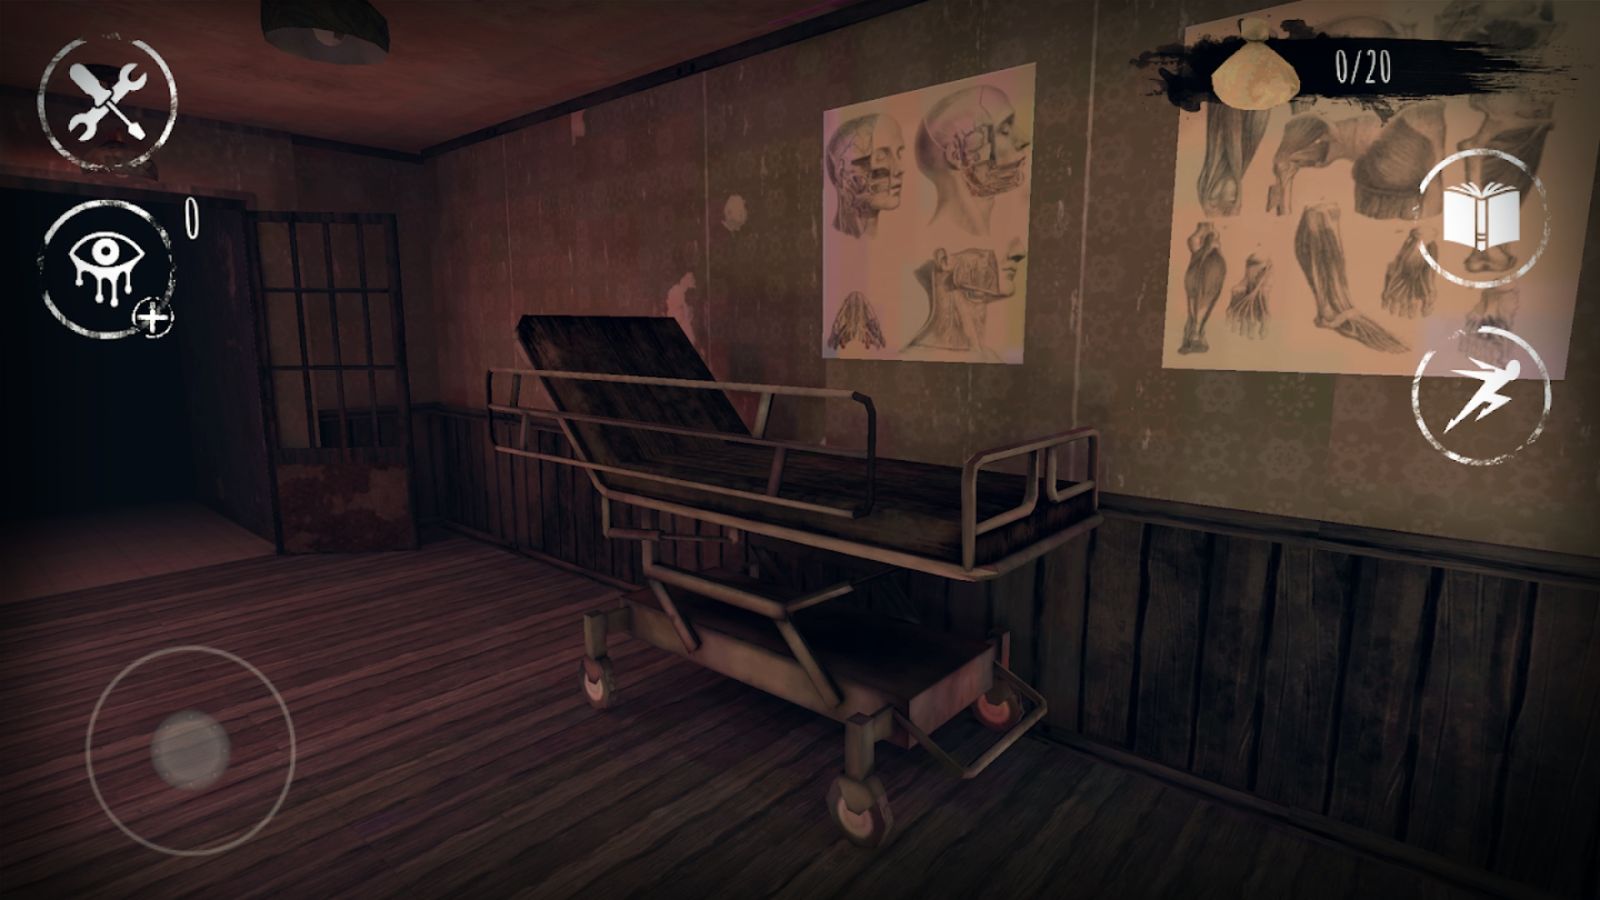 Screenshot from Eyes, showing a haunted hospital room with diagrams of skeletons on the wall